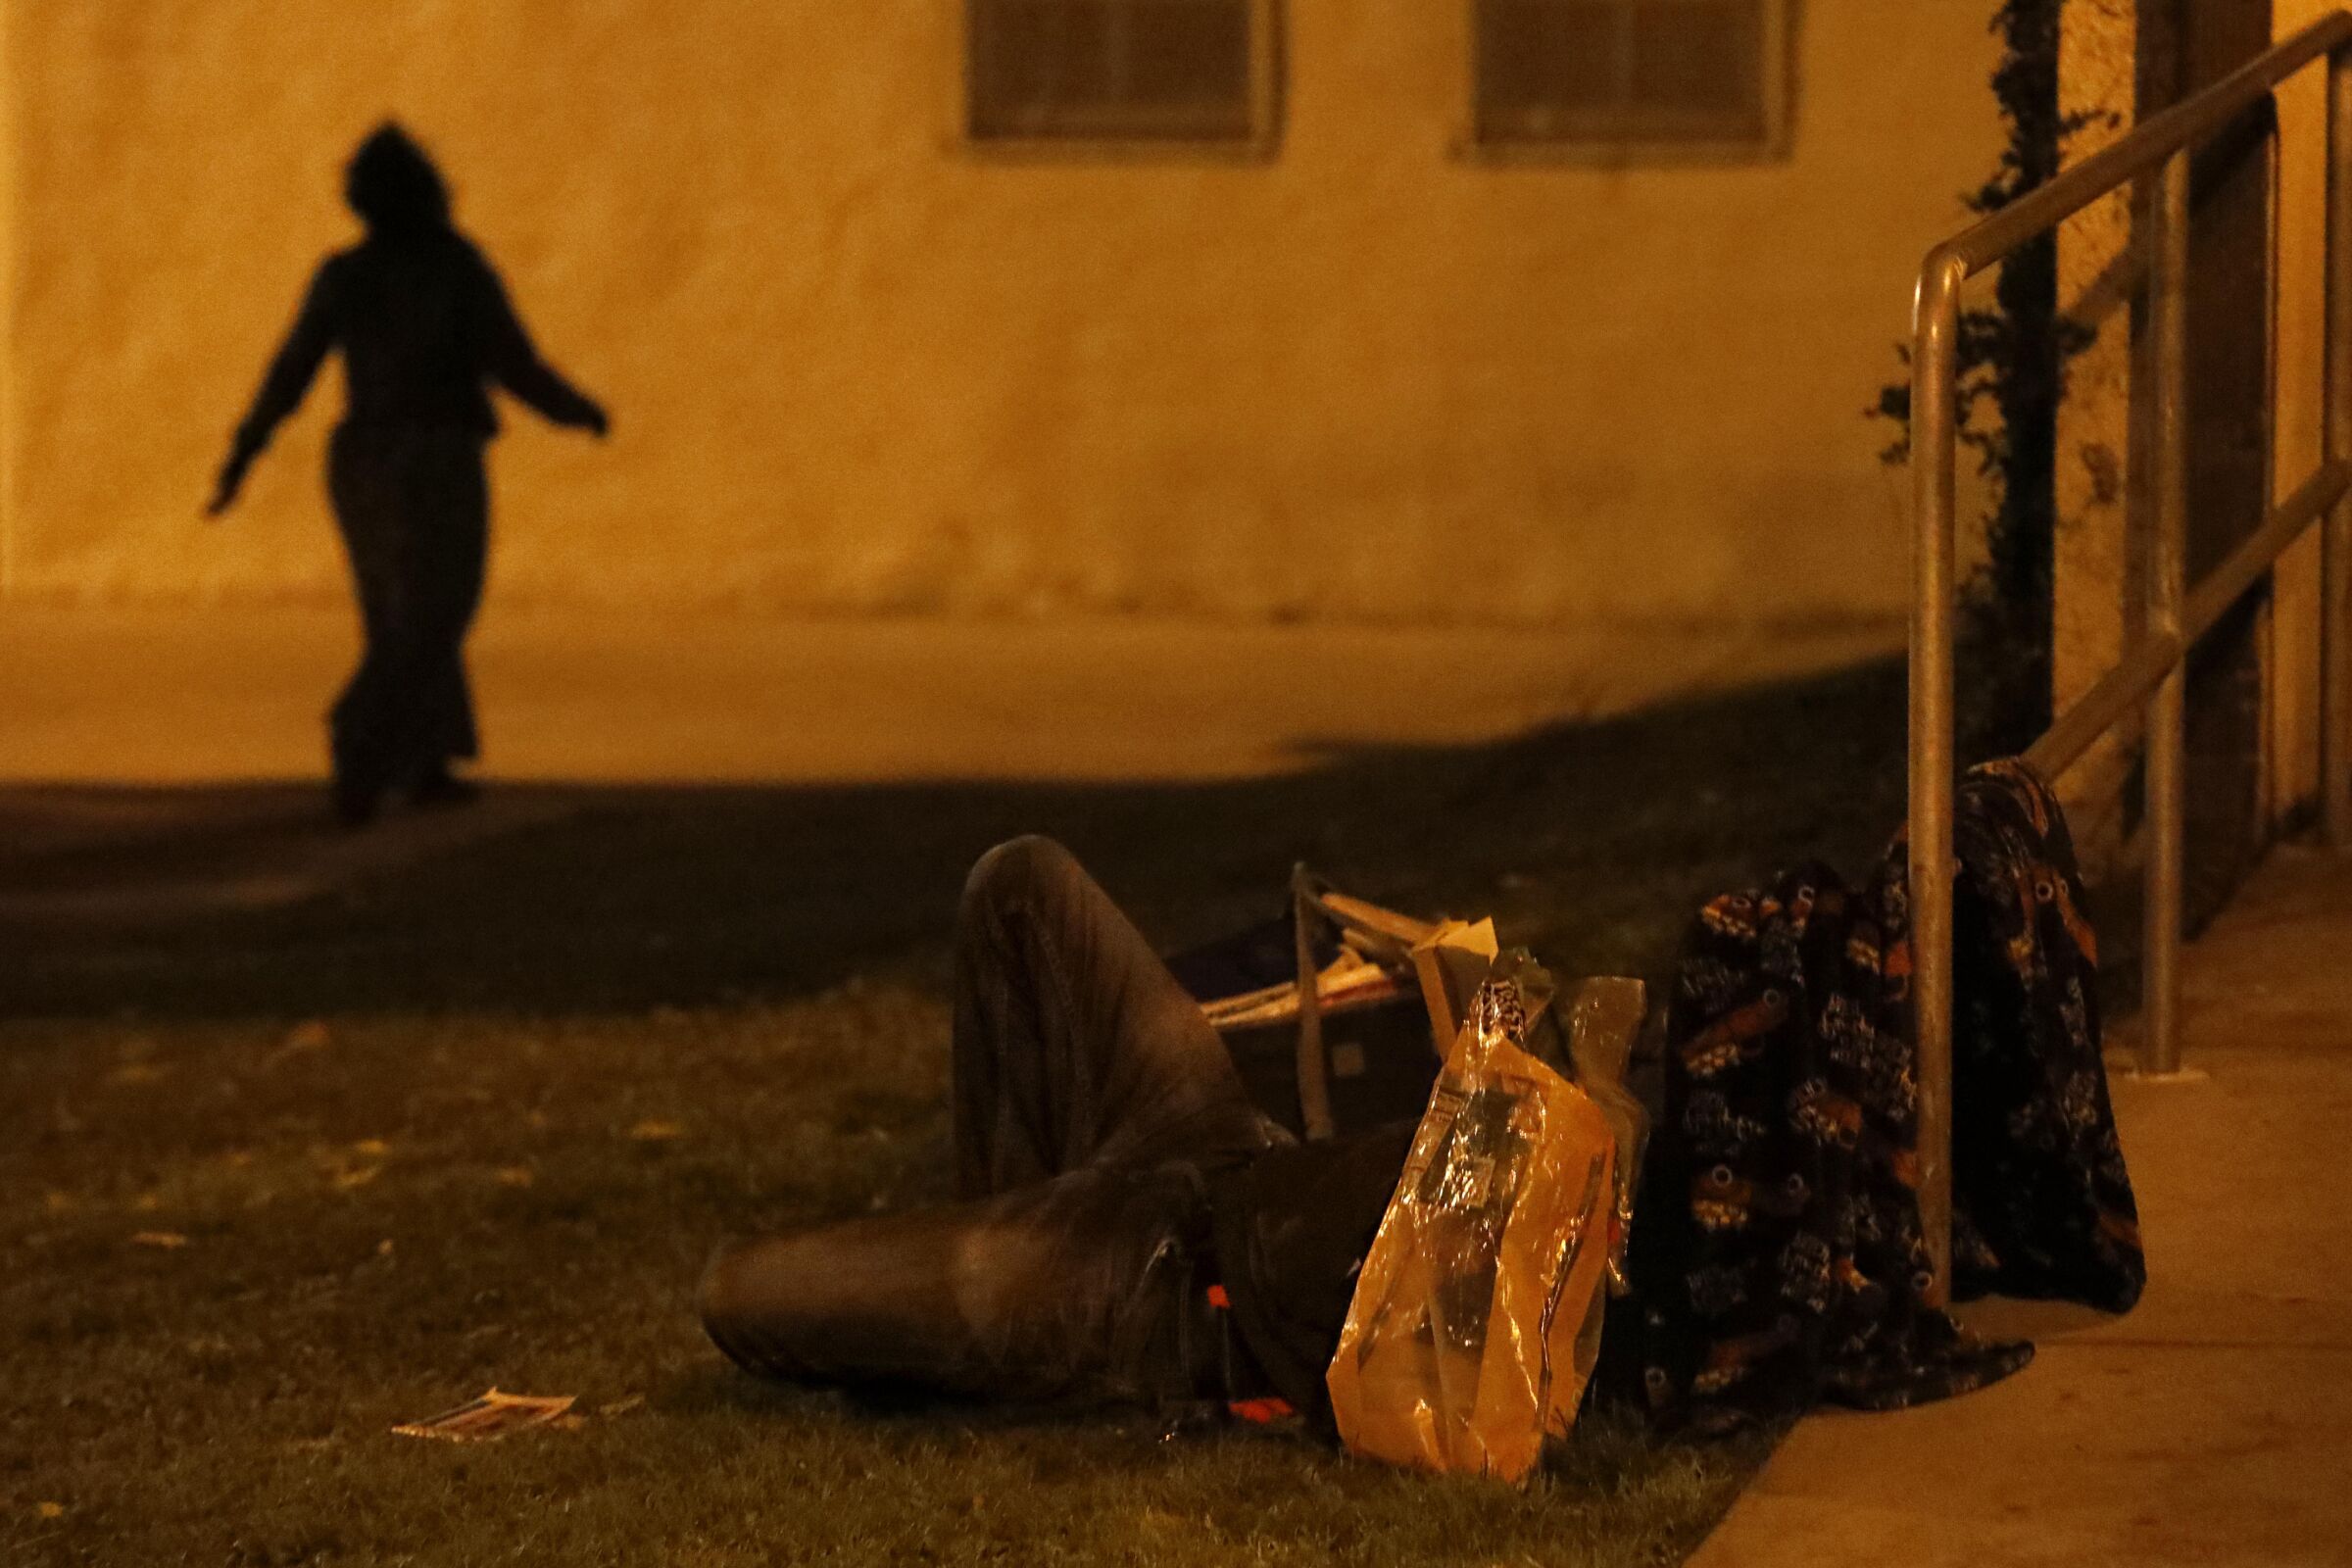 The shadow of a person appears near a person sleeping on the ground, obscured by personal belongings